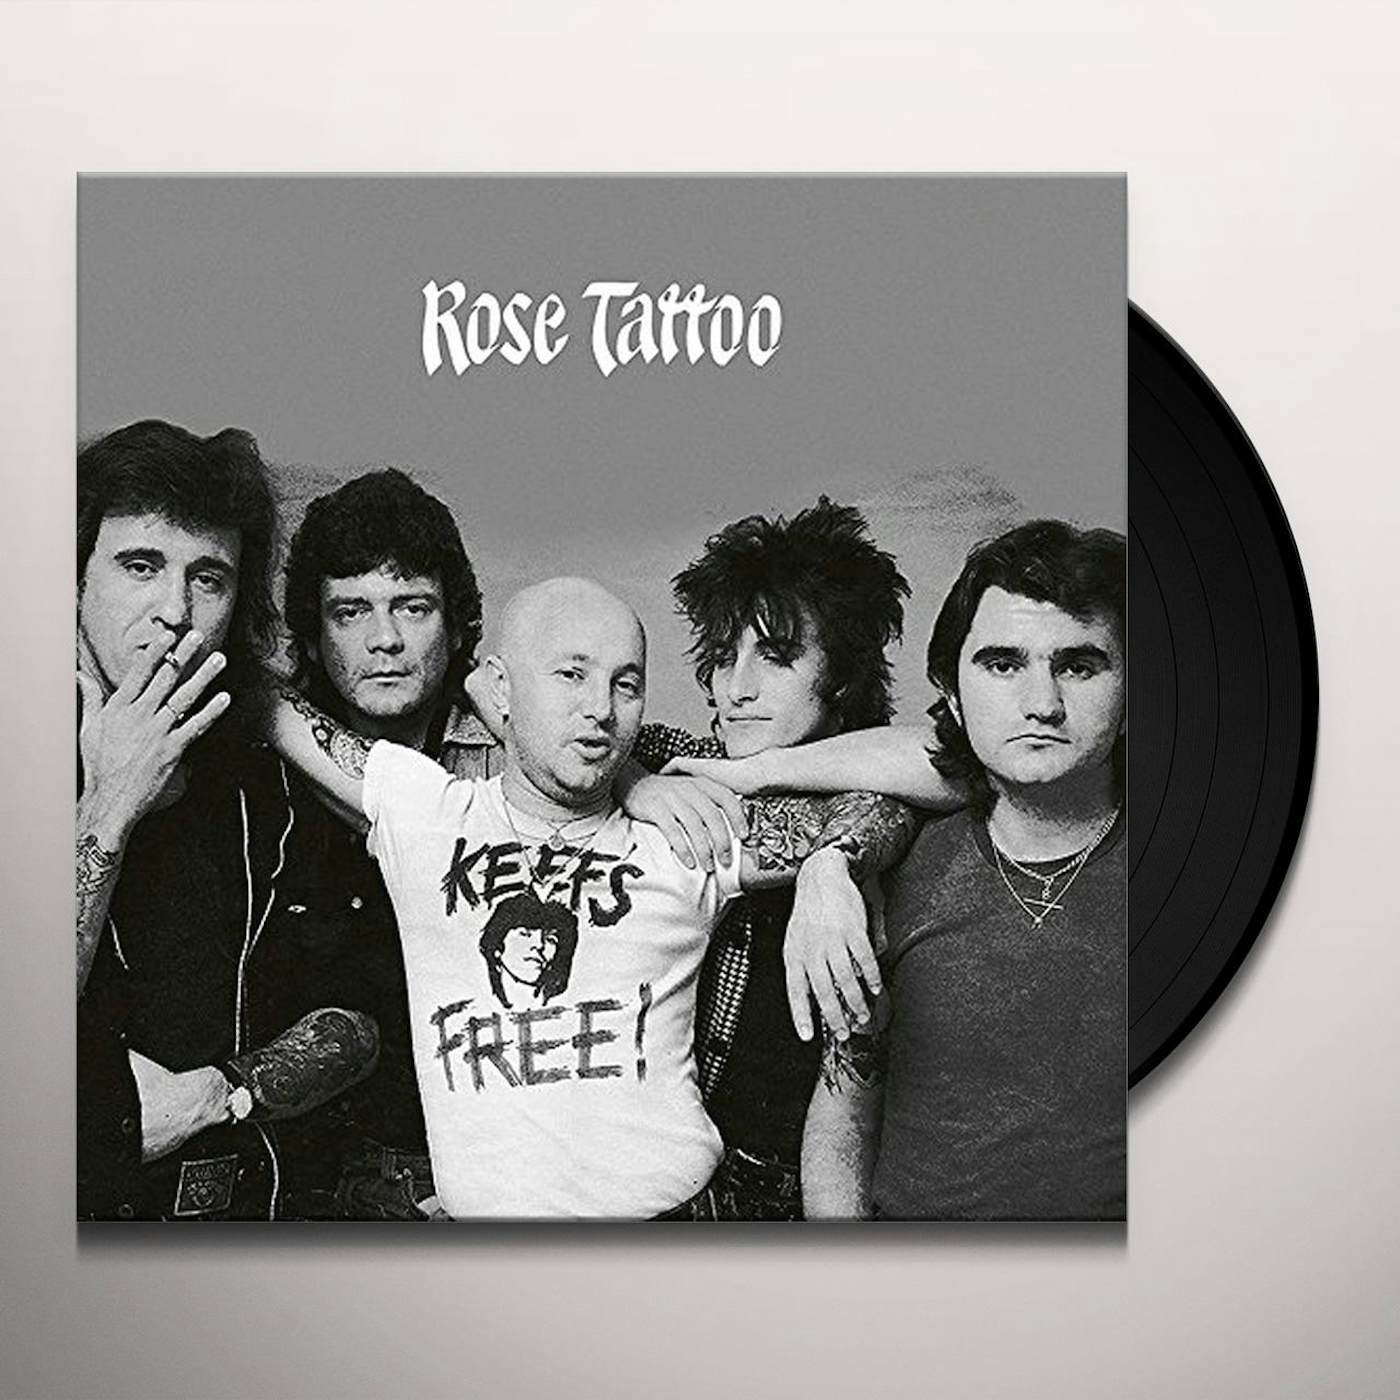 Rose Tattoo KEEF'S FREE: OF Vinyl Record